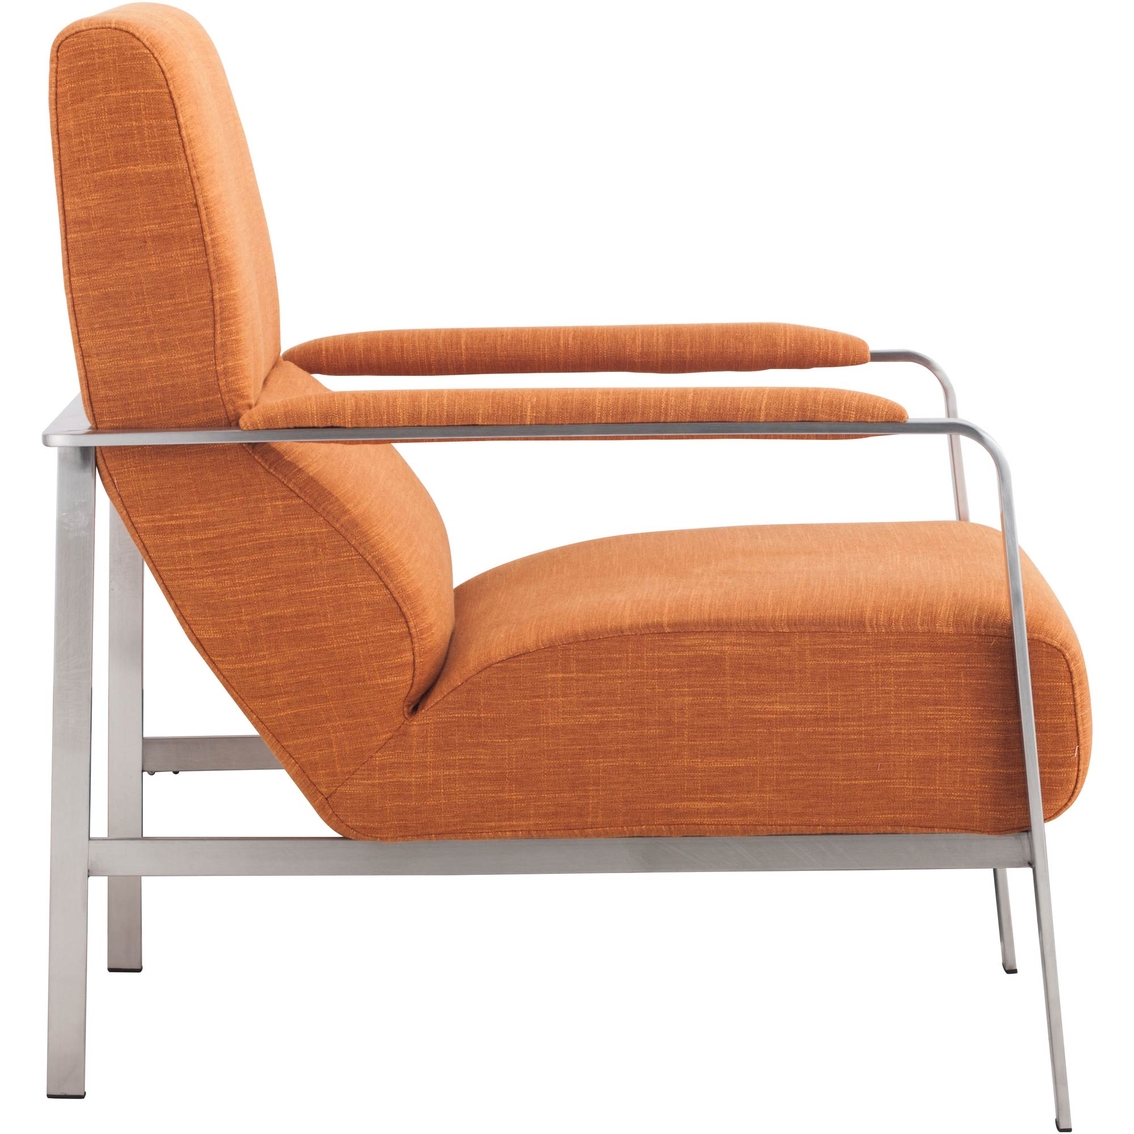 Zuo Jonkoping Arm Chair - Image 2 of 4